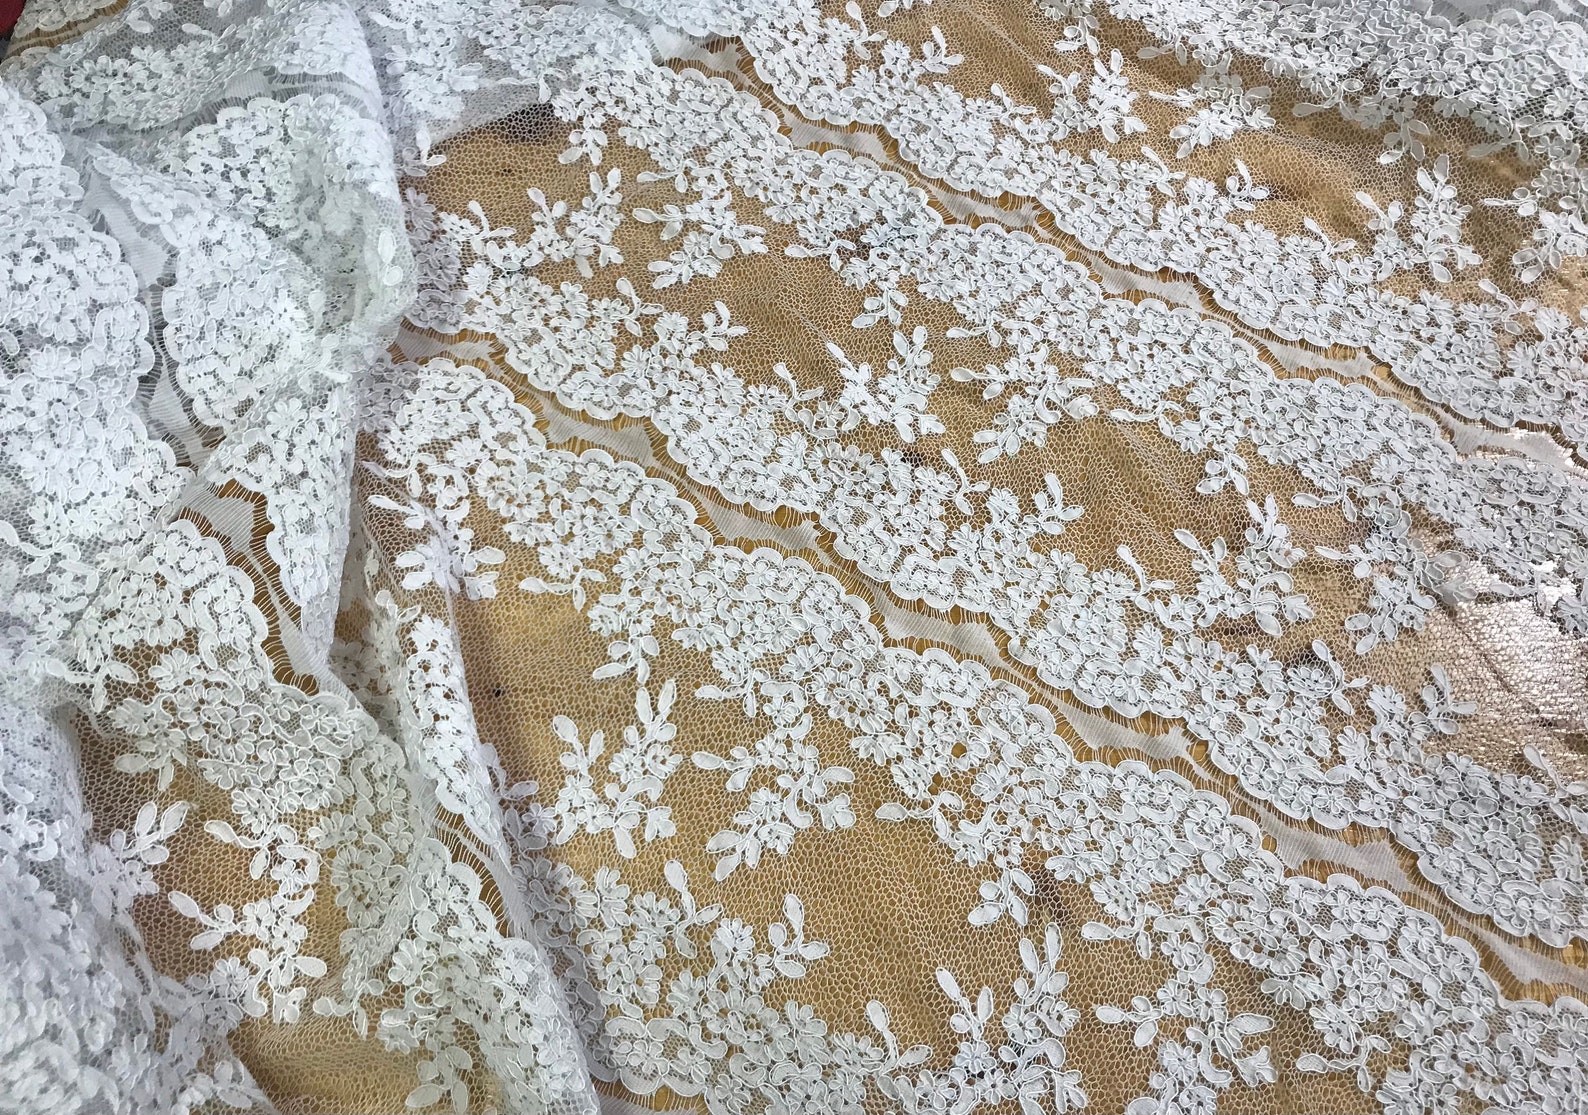 Scalloped lace fabric/wedding lace fabric/corded | Etsy